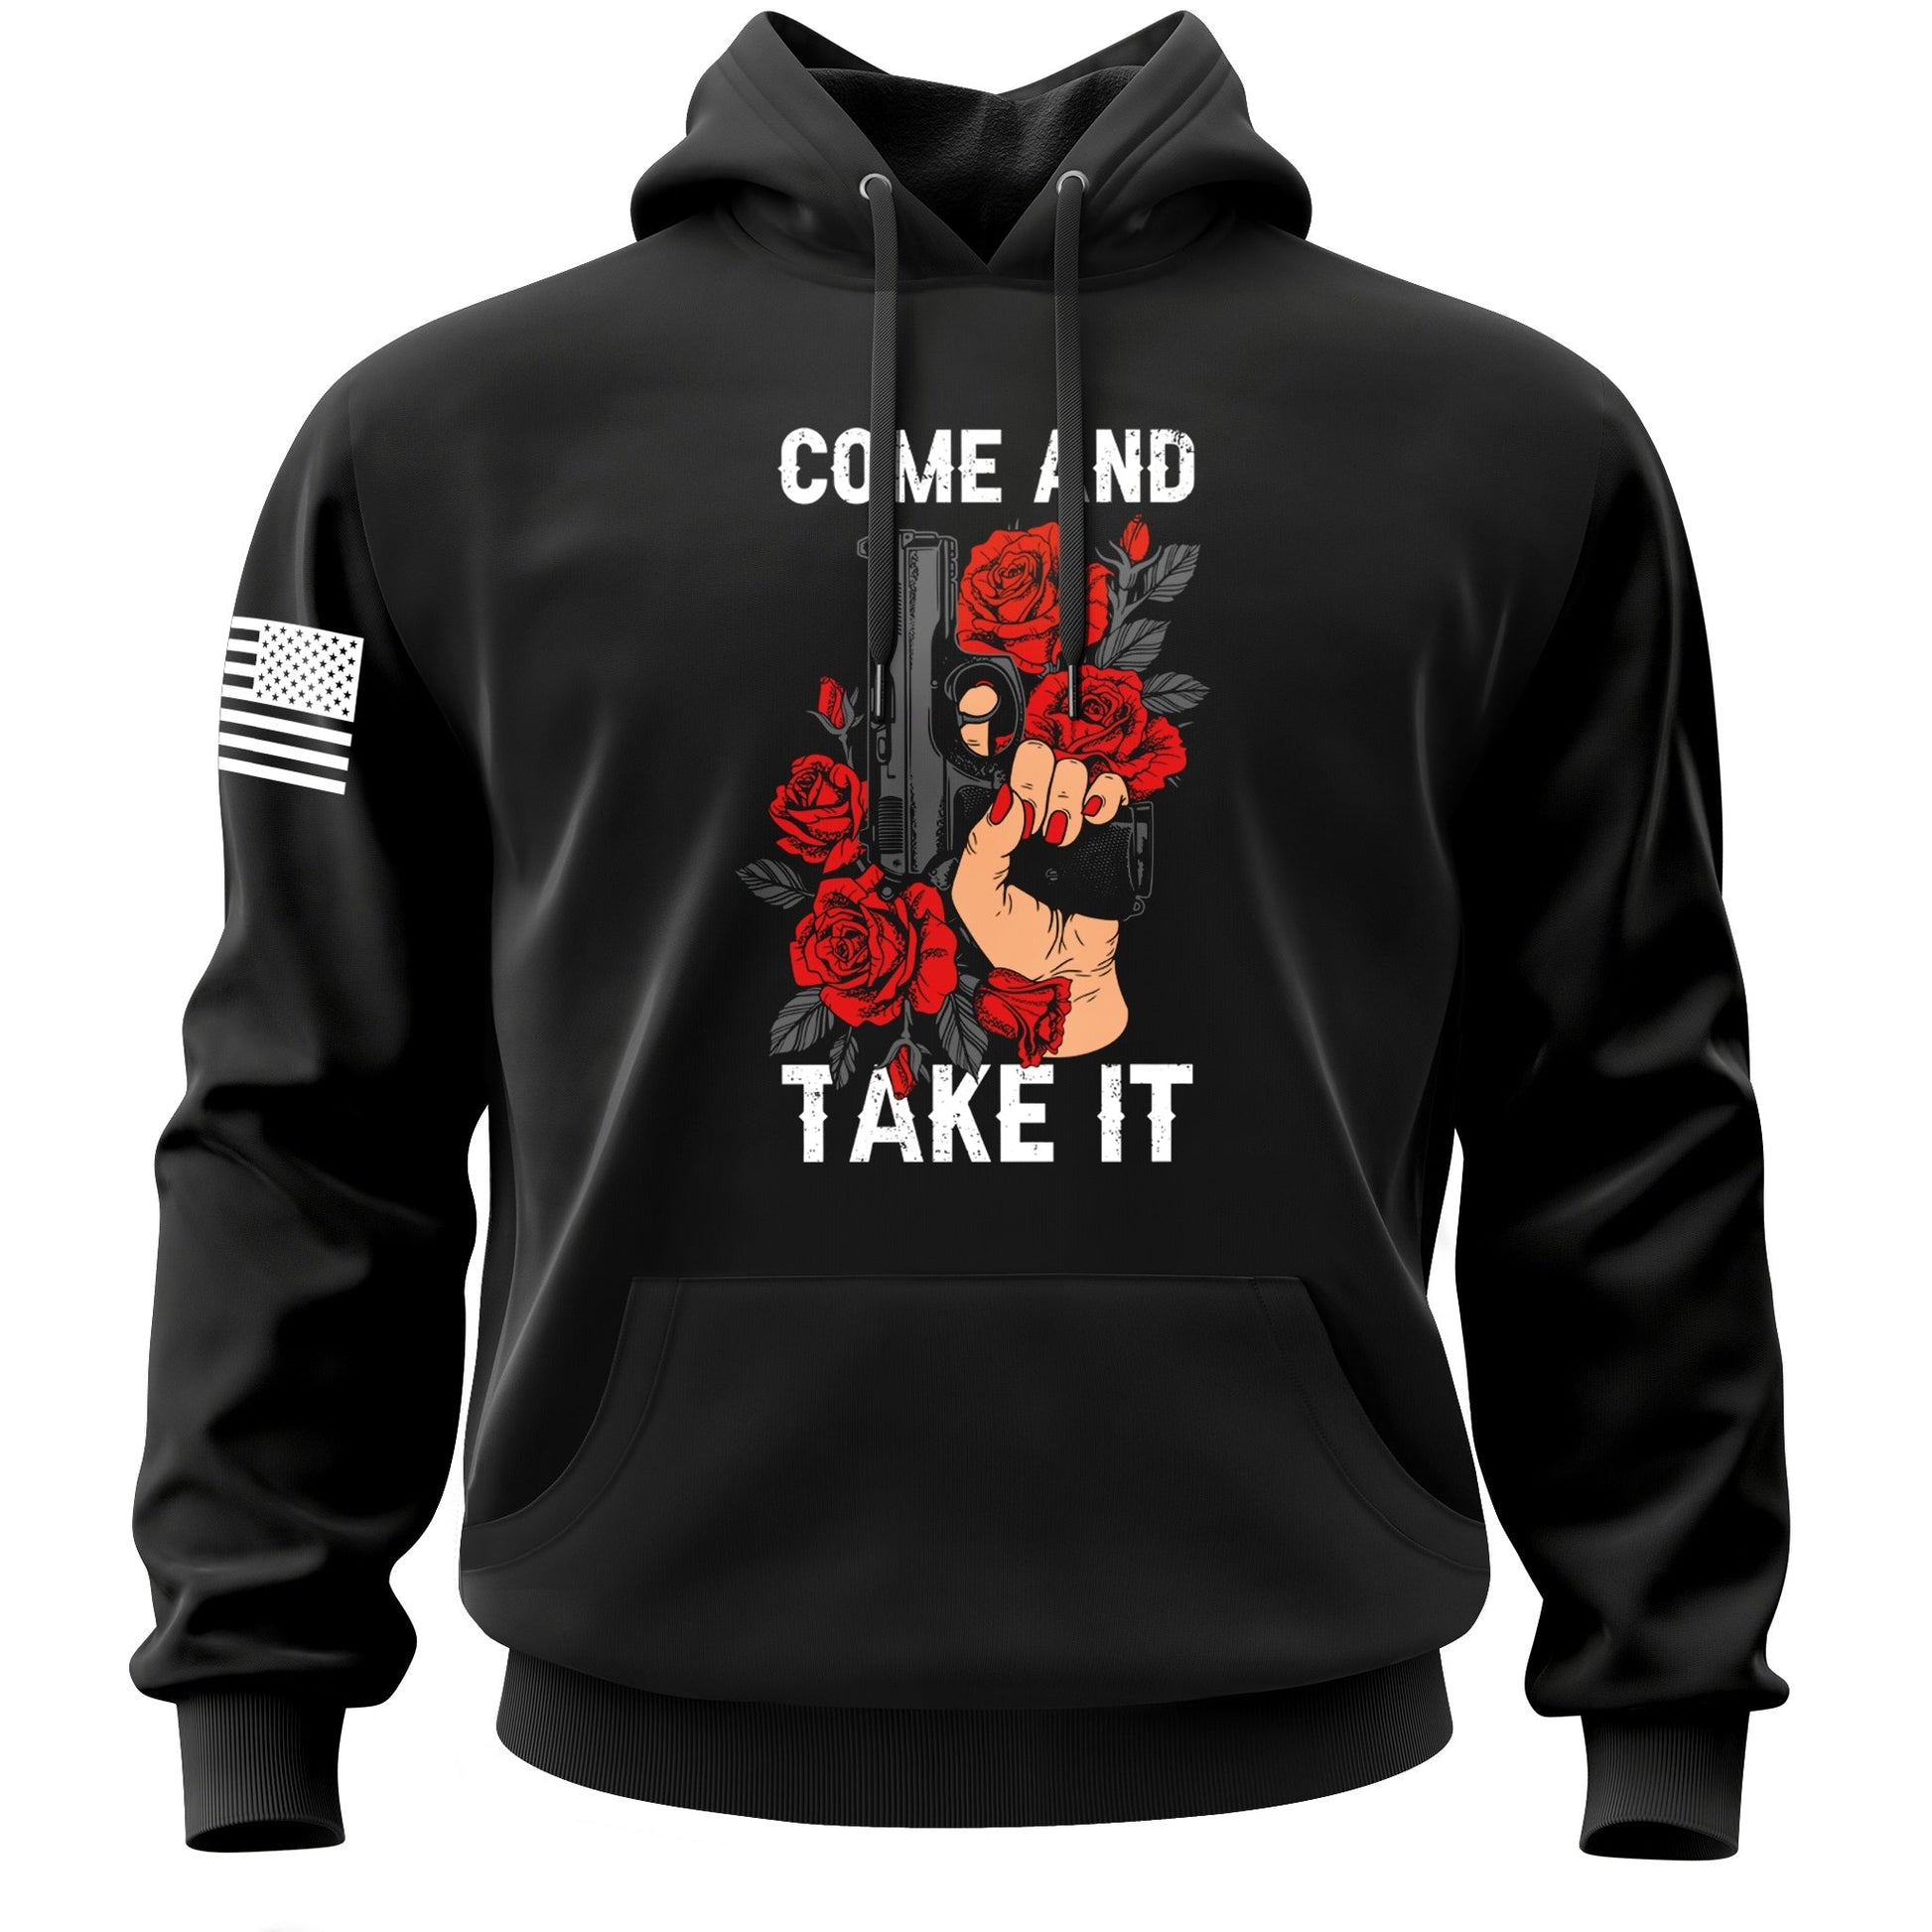 Come and Take It V2 Hoodie - Tactical Pro Supply, LLC